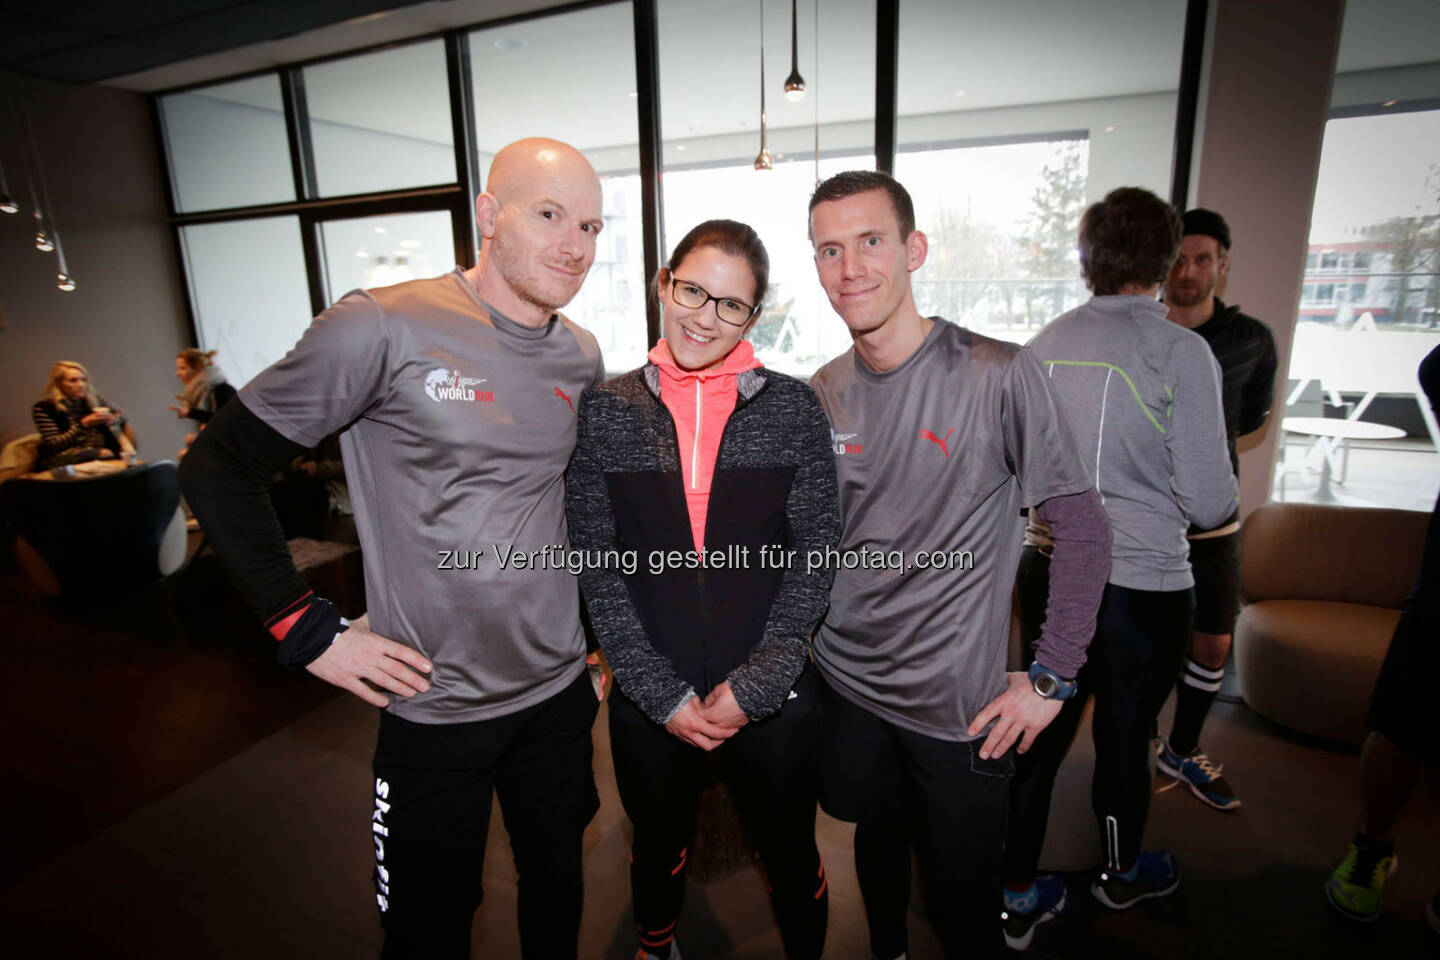 Participants at the Wings for Life World Run event in Munich 23rd of January 2016, Thomas Rottenberg on the left  (Bild: Daniel Grund)